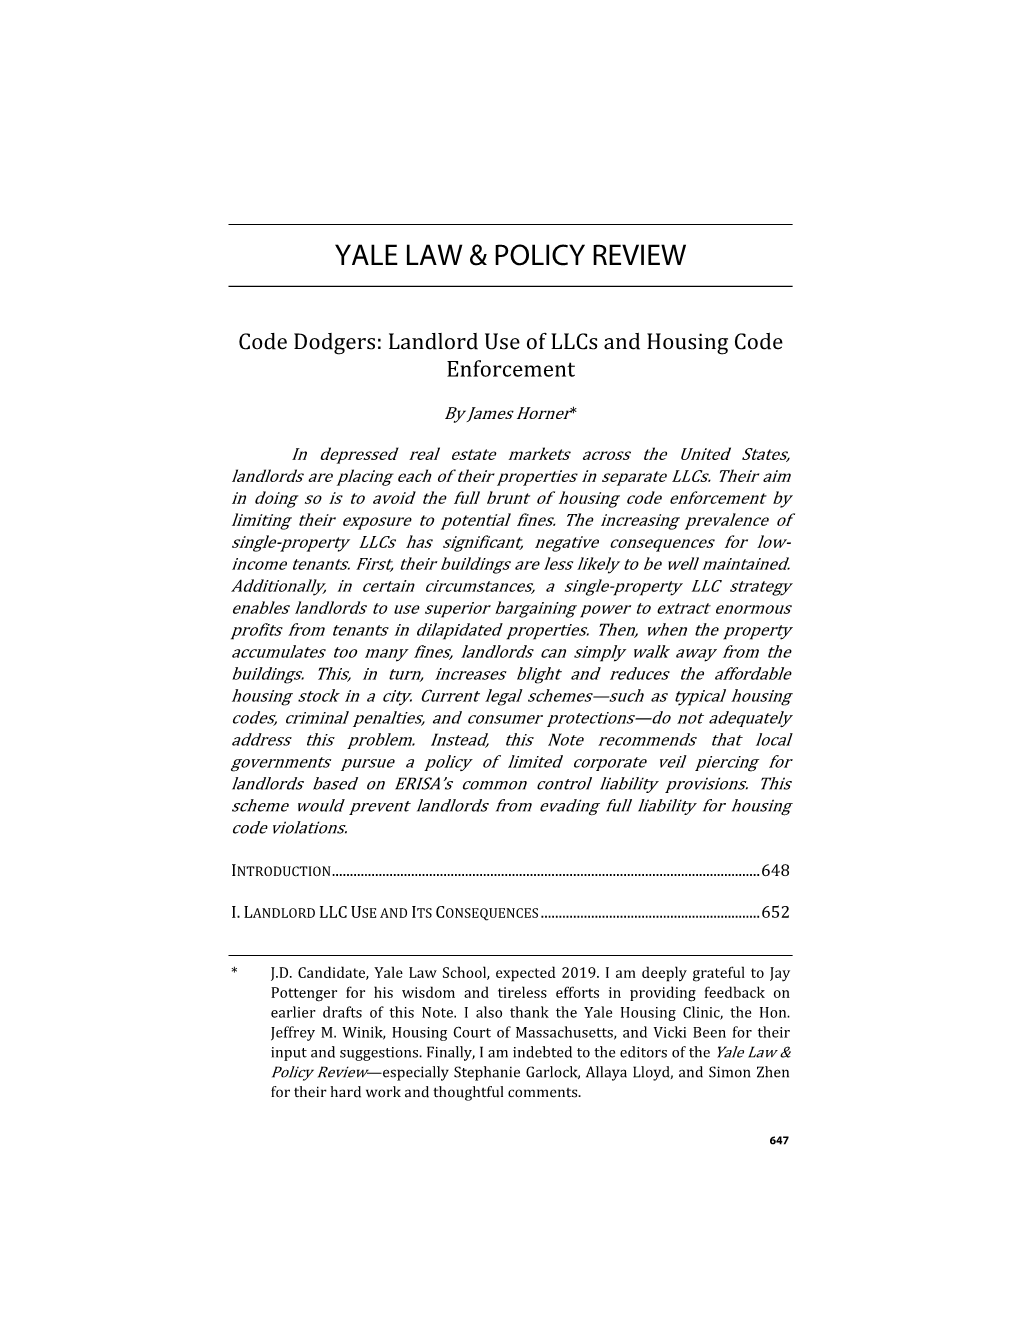 Landlord Use of Llcs and Housing Code Enforcement